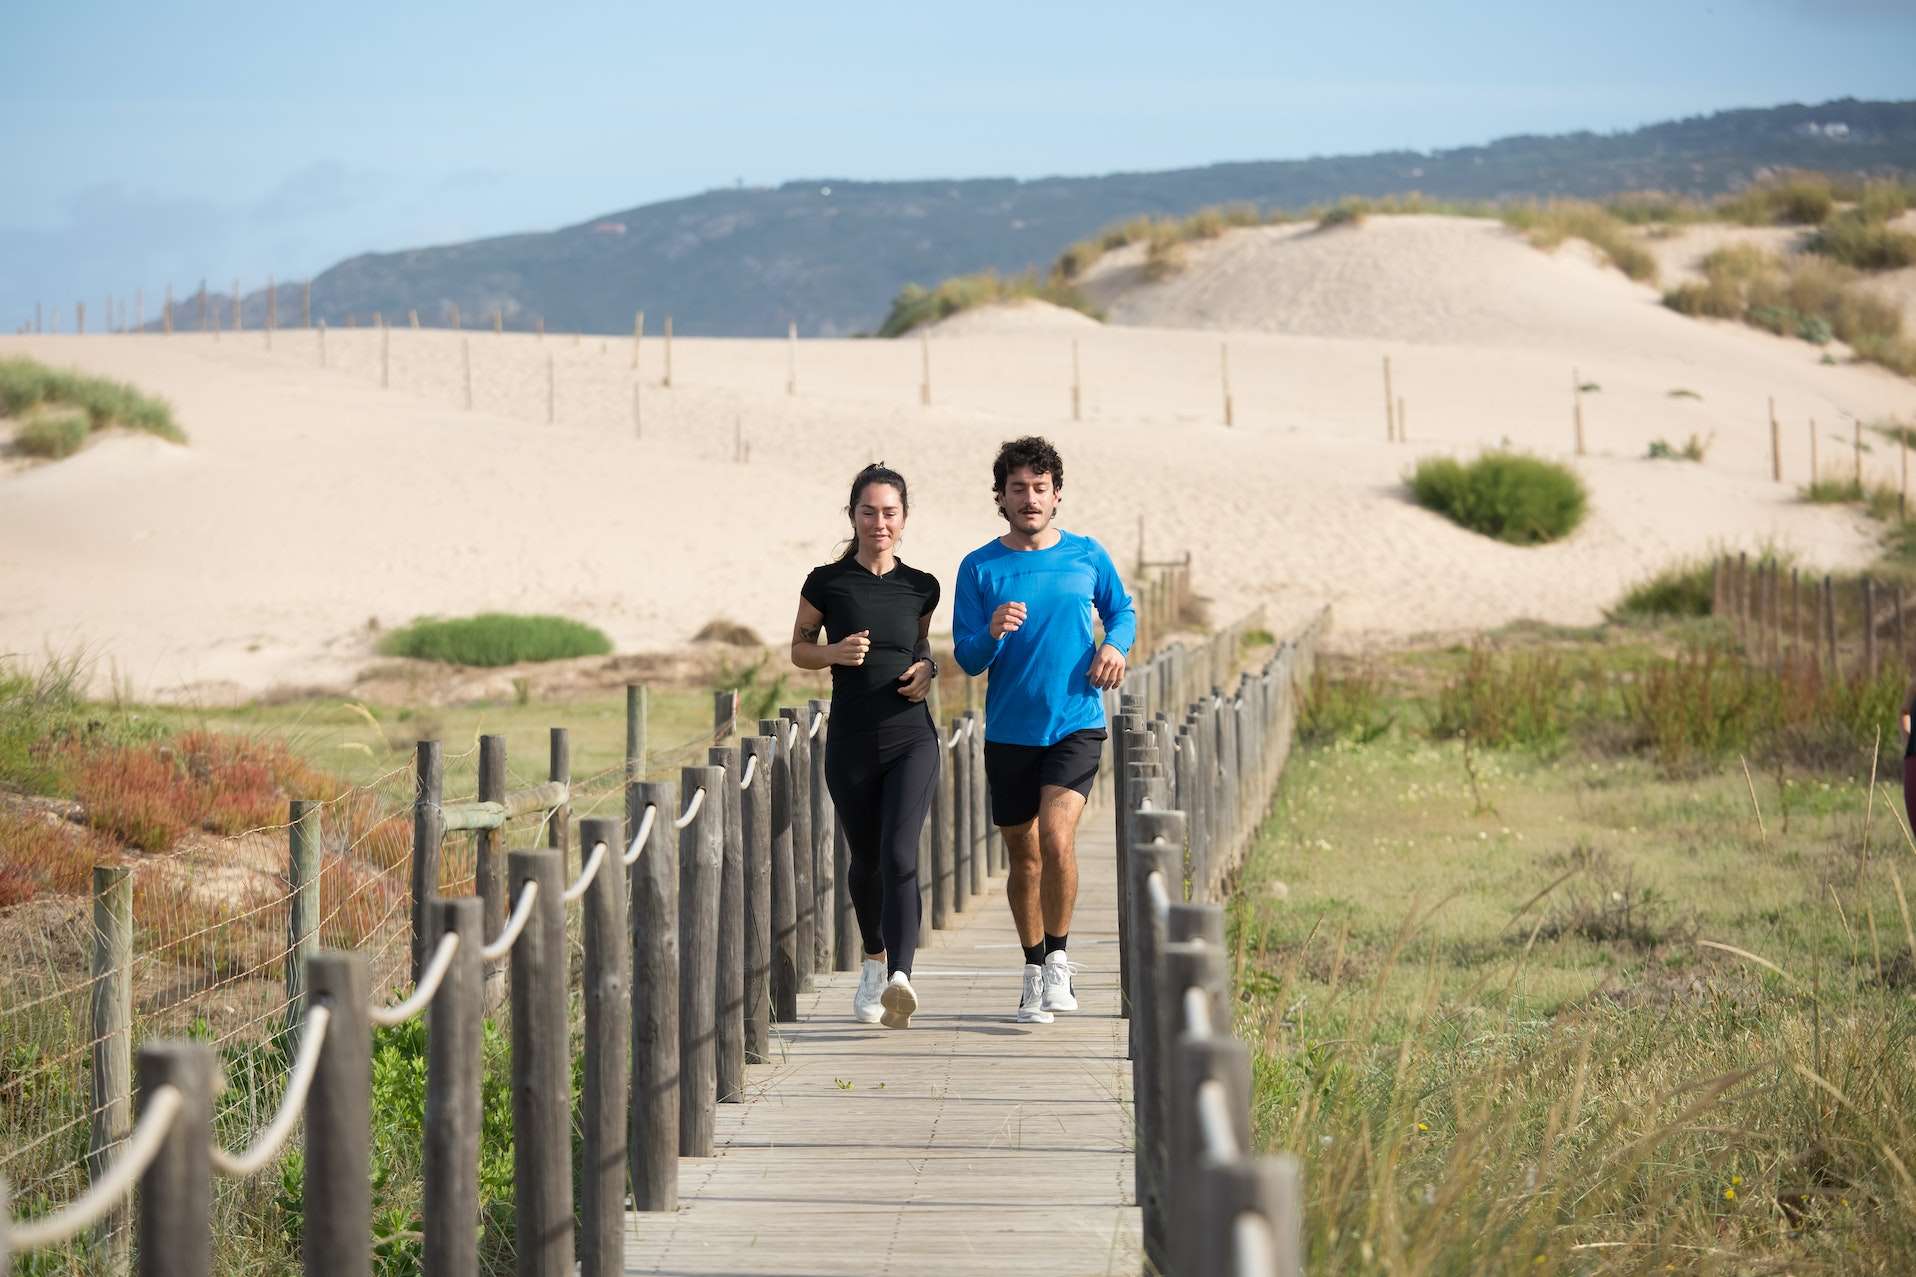 Man and Woman Jogging on a Boardwalk
